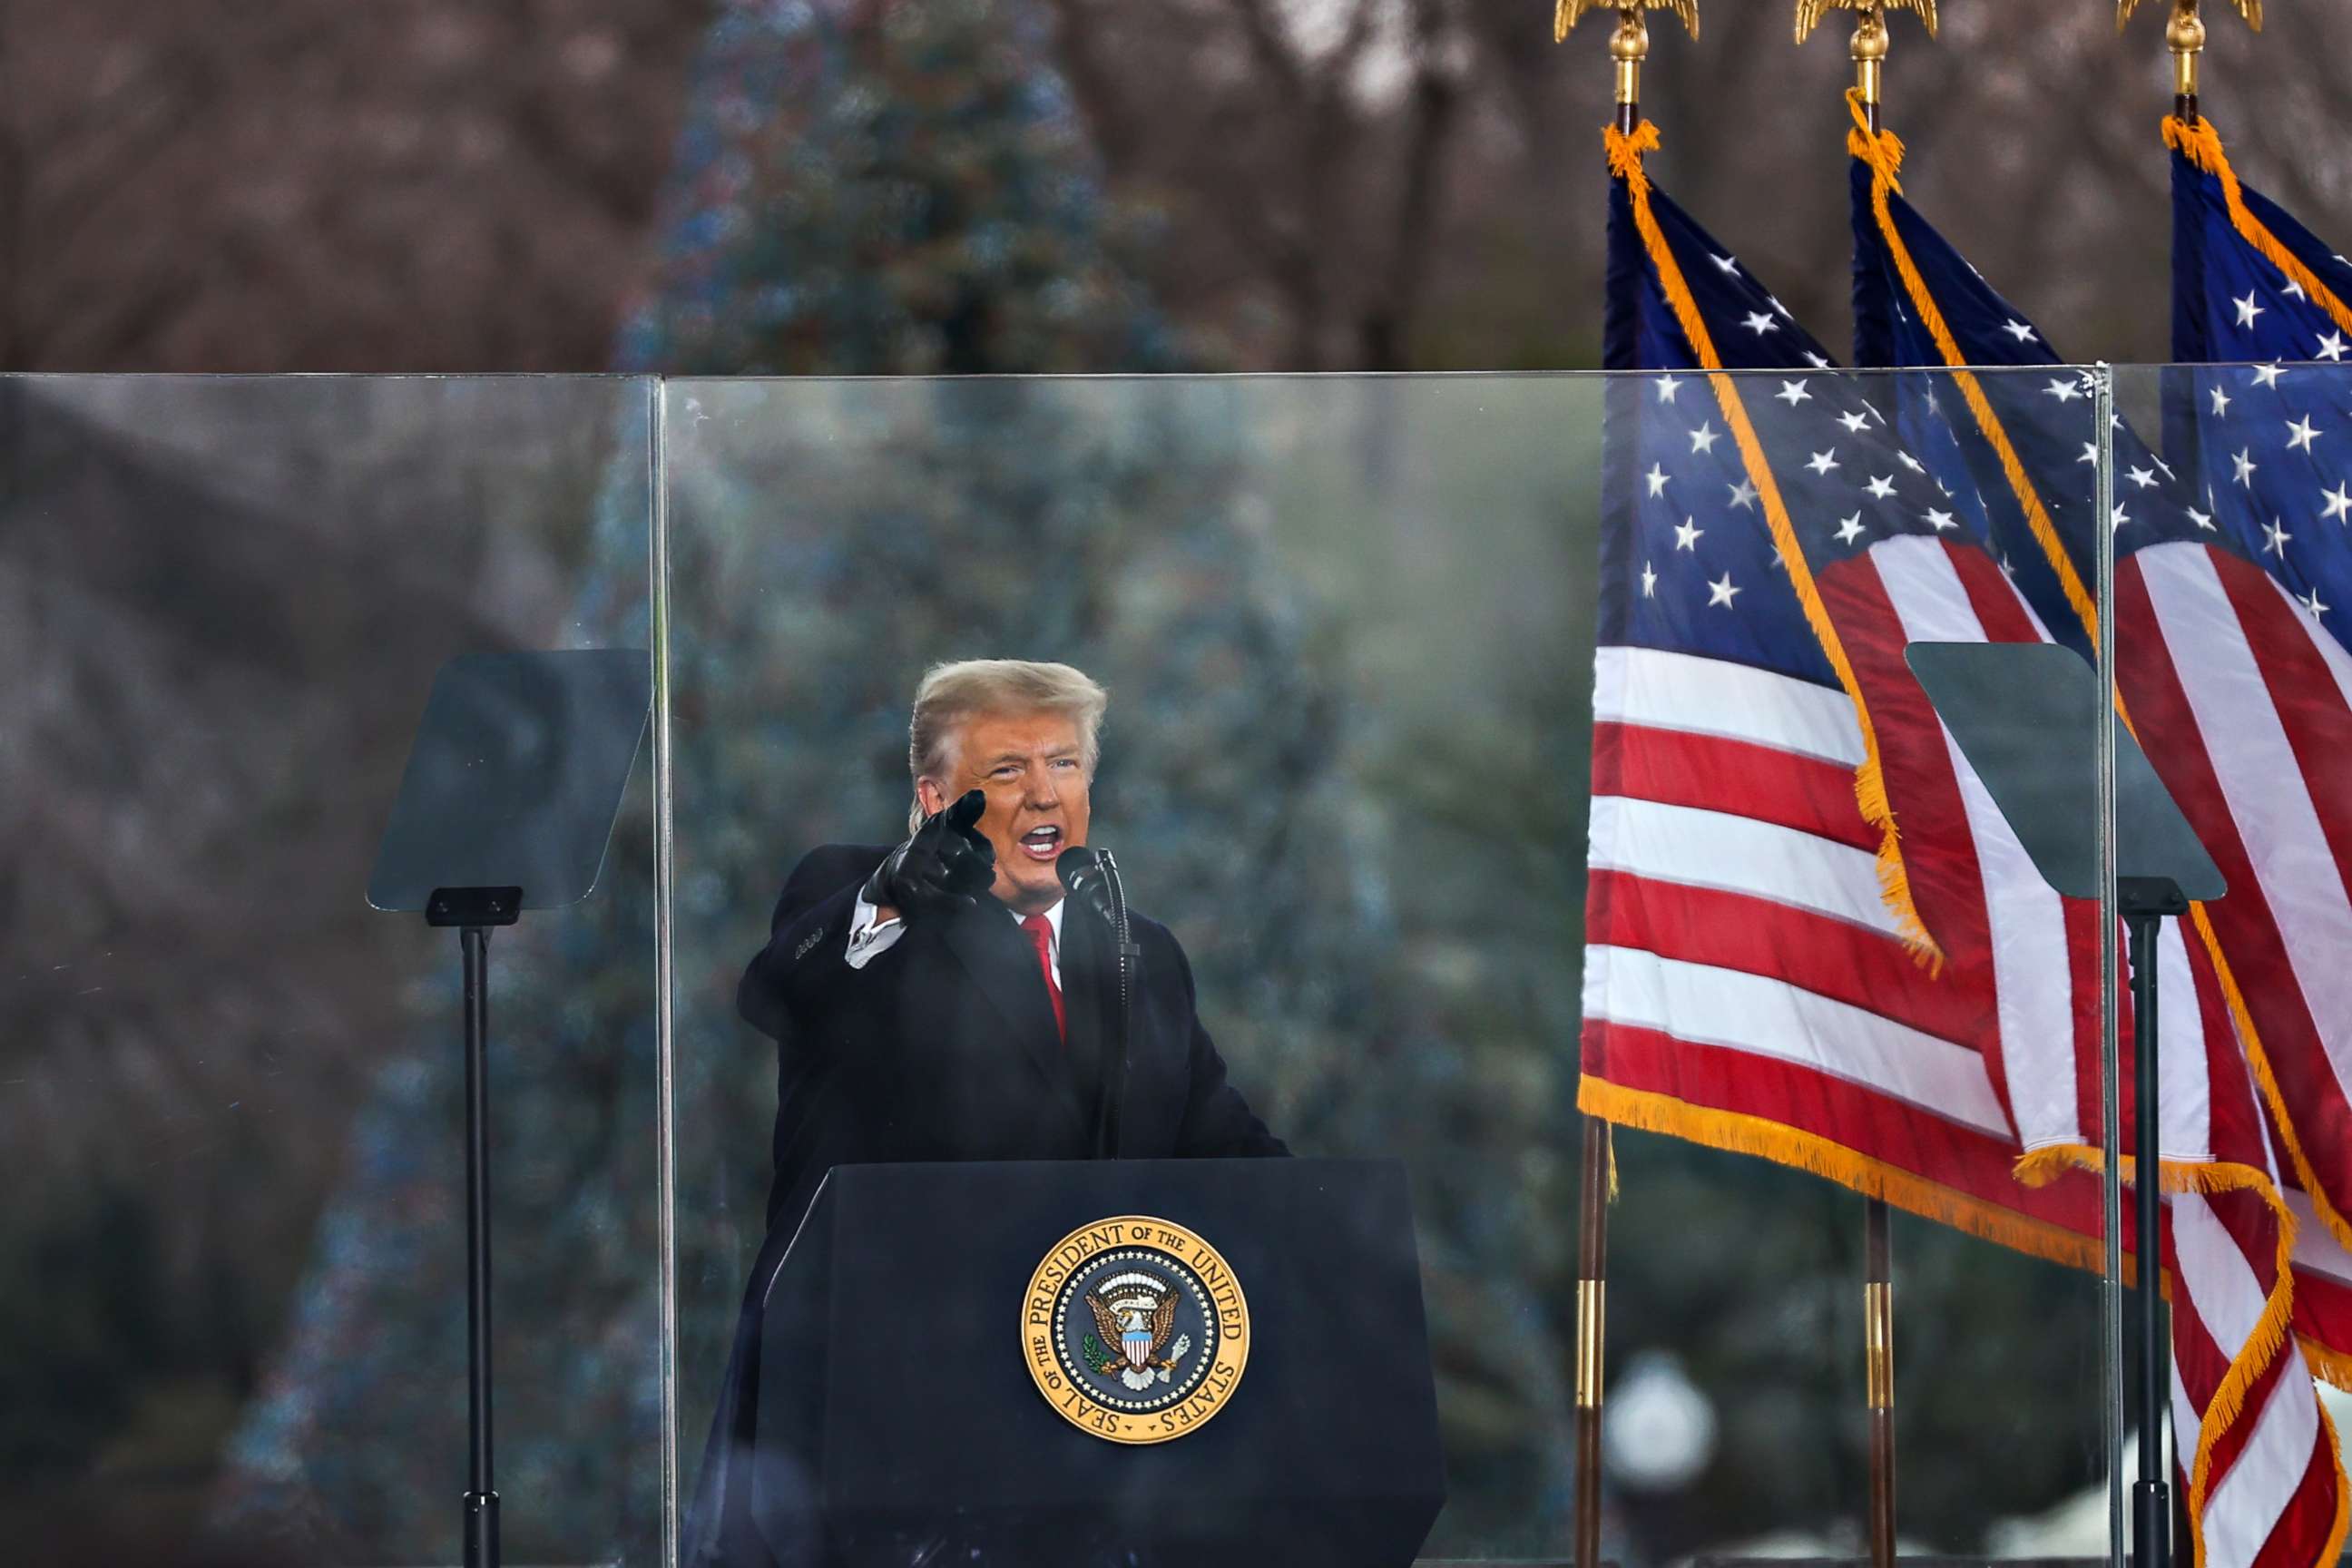 PHOTO: President Donald Trump speaks at a "Save America March" rally in Washington D.C. on Jan  6, 2021.